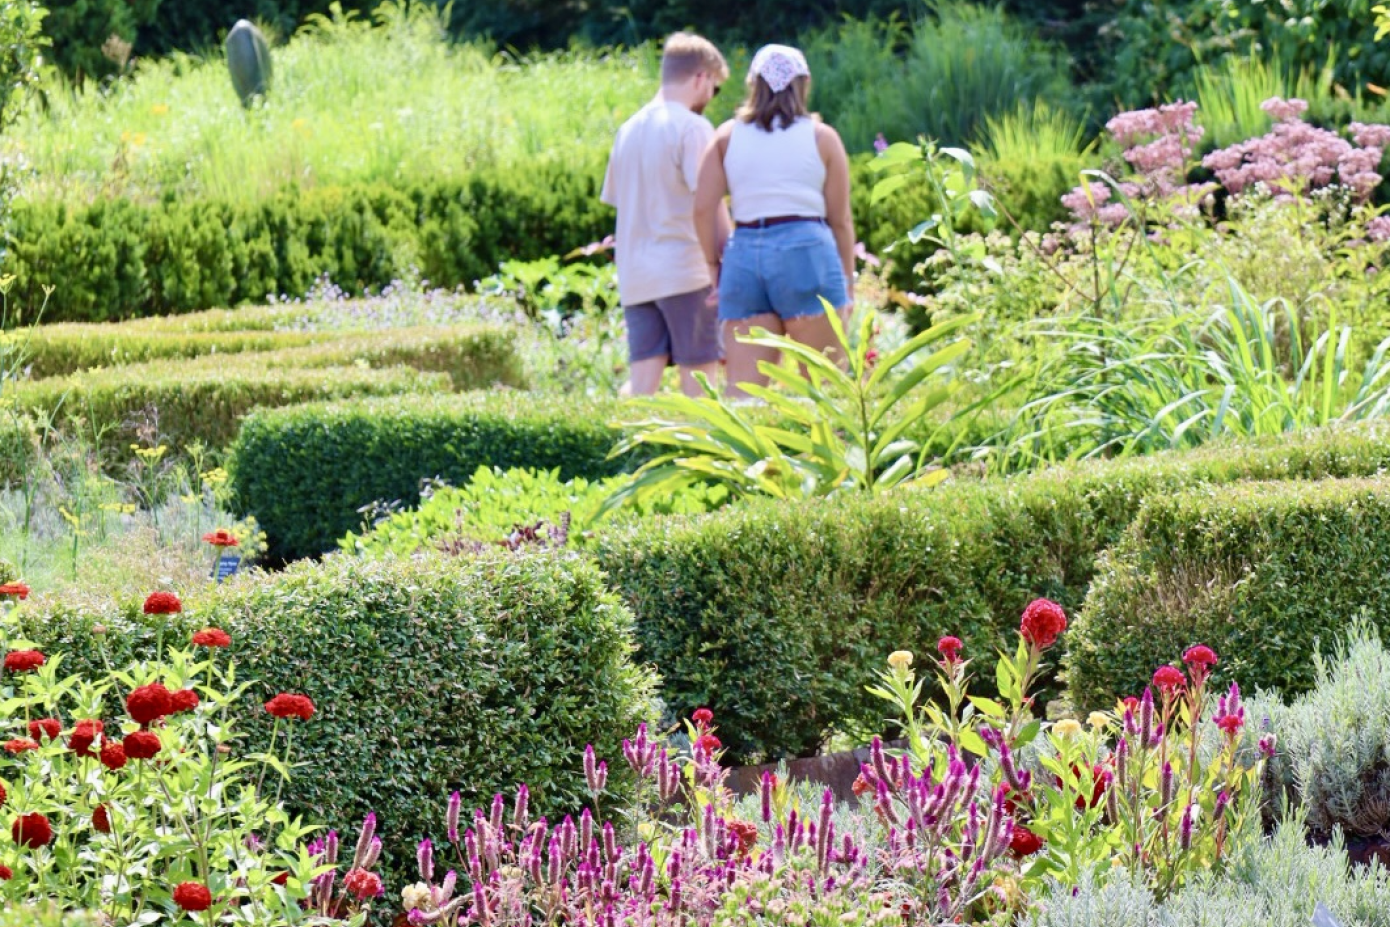 Two people exploring the garden